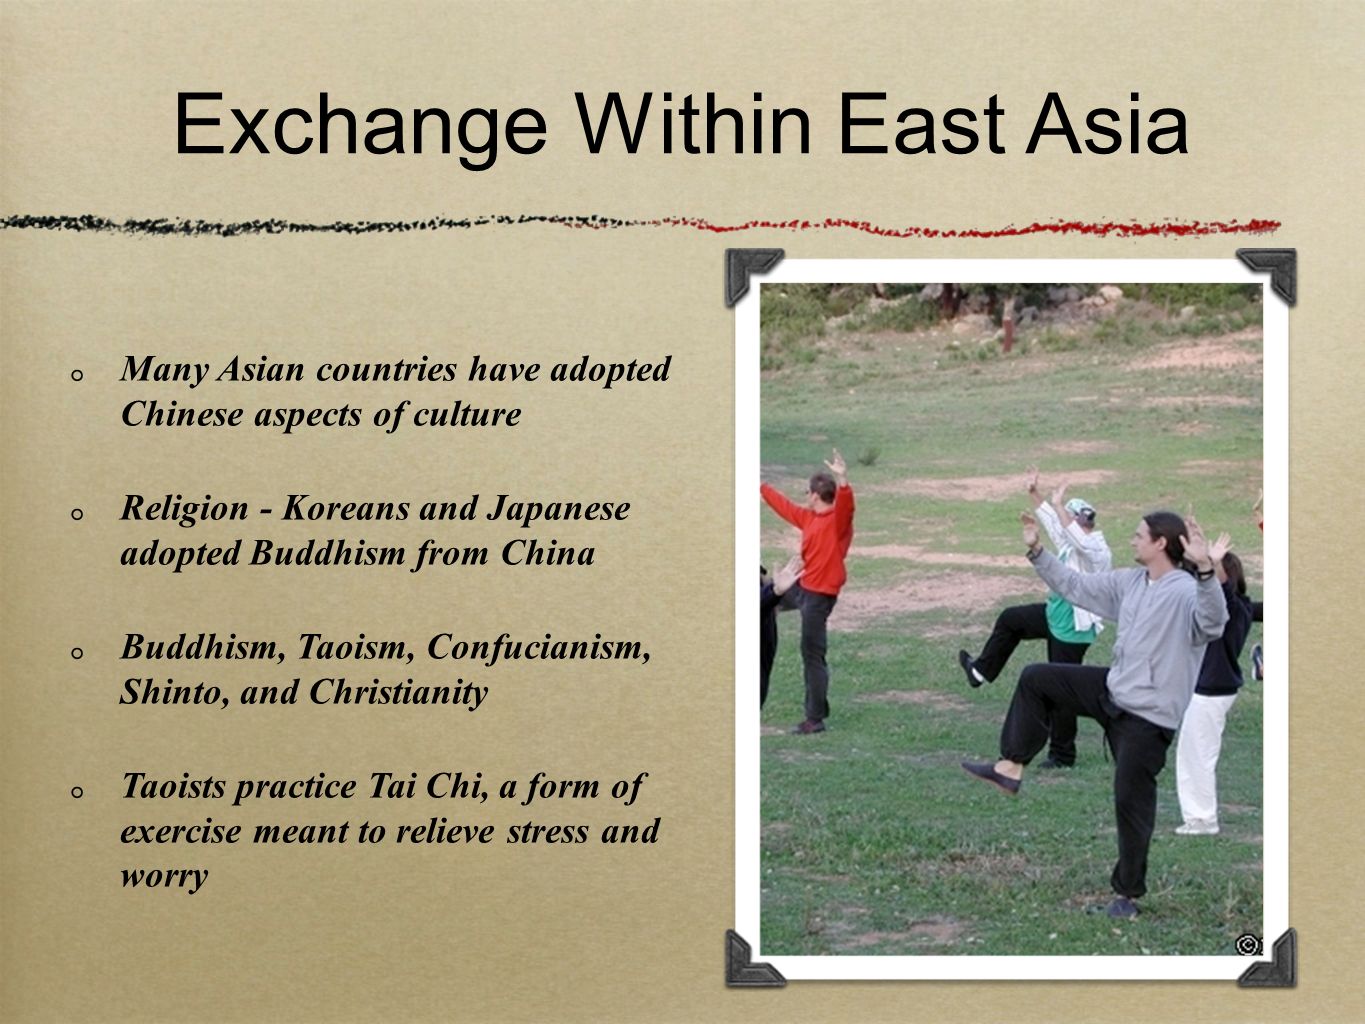 Exchange Within East Asia Many Asian countries have adopted Chinese aspects of culture Religion - Koreans and Japanese adopted Buddhism from China Buddhism, Taoism, Confucianism, Shinto, and Christianity Taoists practice Tai Chi, a form of exercise meant to relieve stress and worry